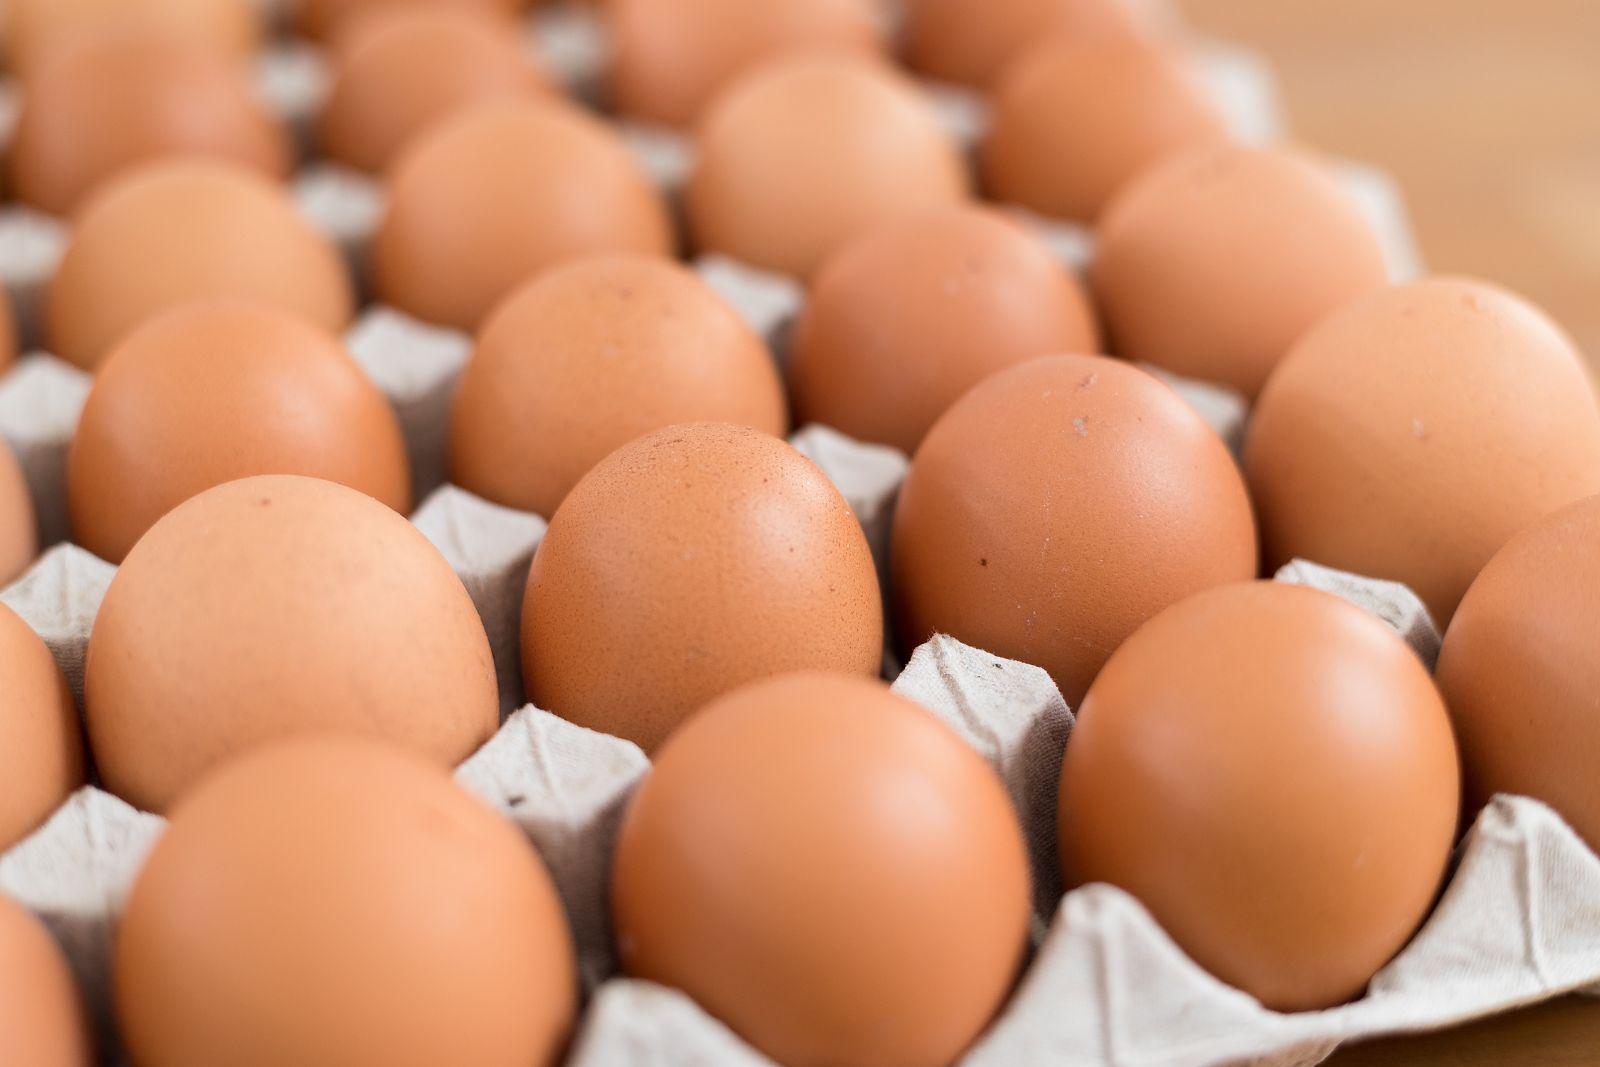 A Guide to Egg Allergies for the Food Industry